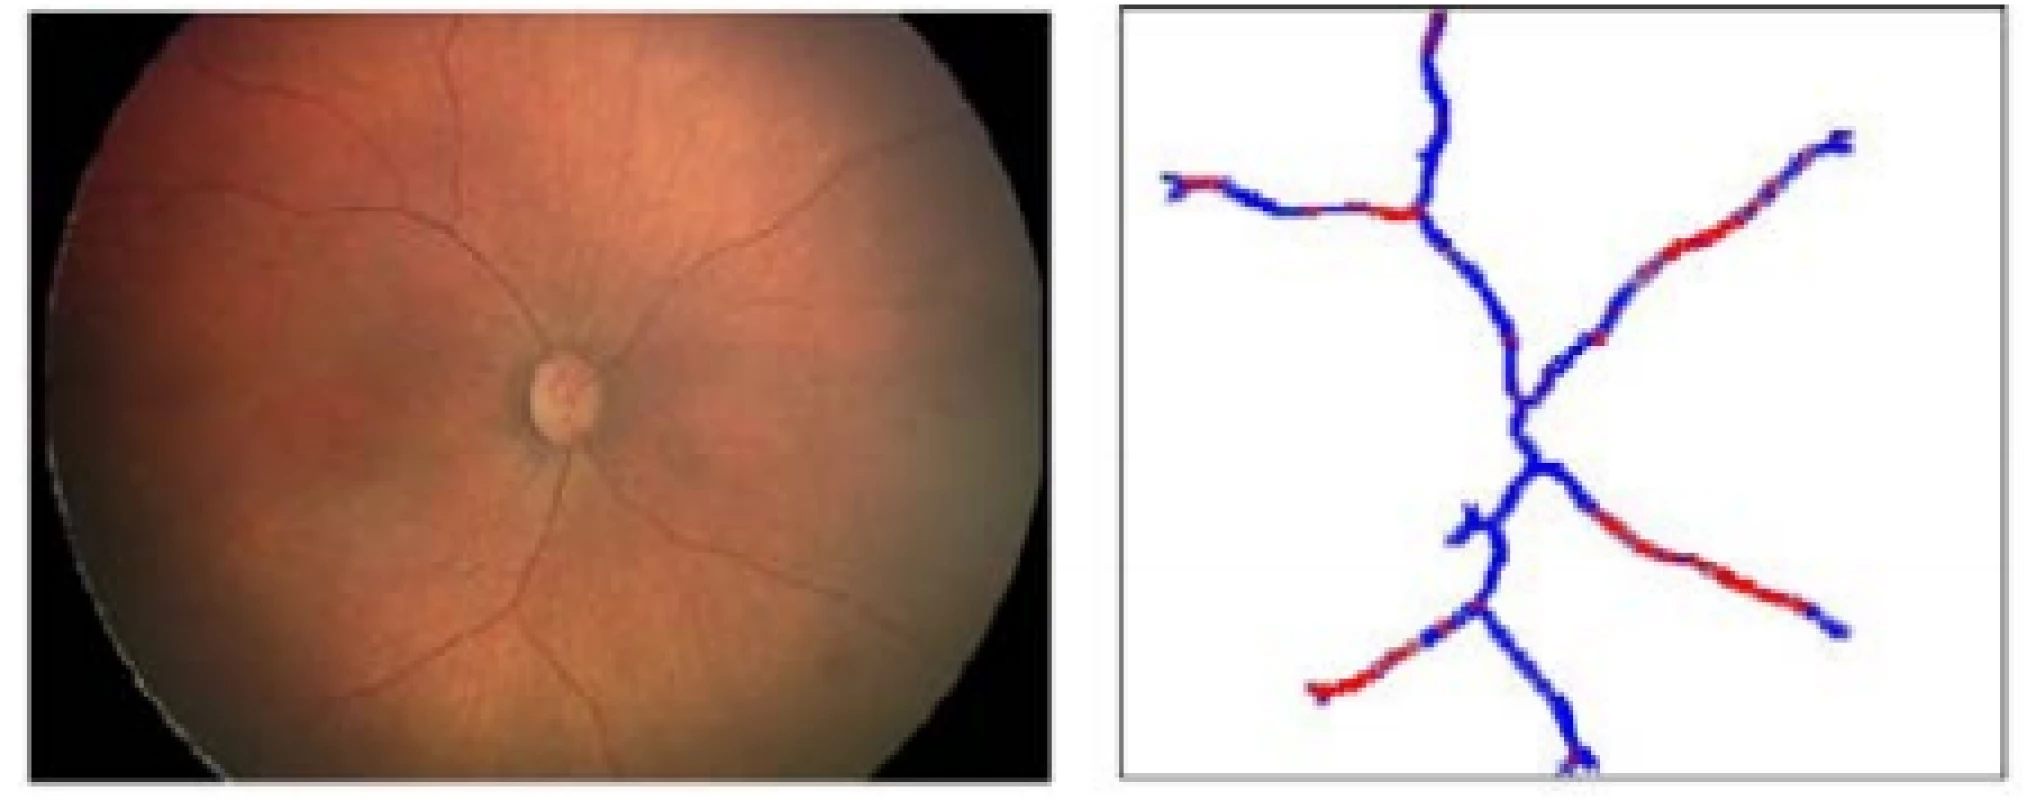 Native image (left), multiple thresholding of
tortuosity in retinal blood vessels image (right)